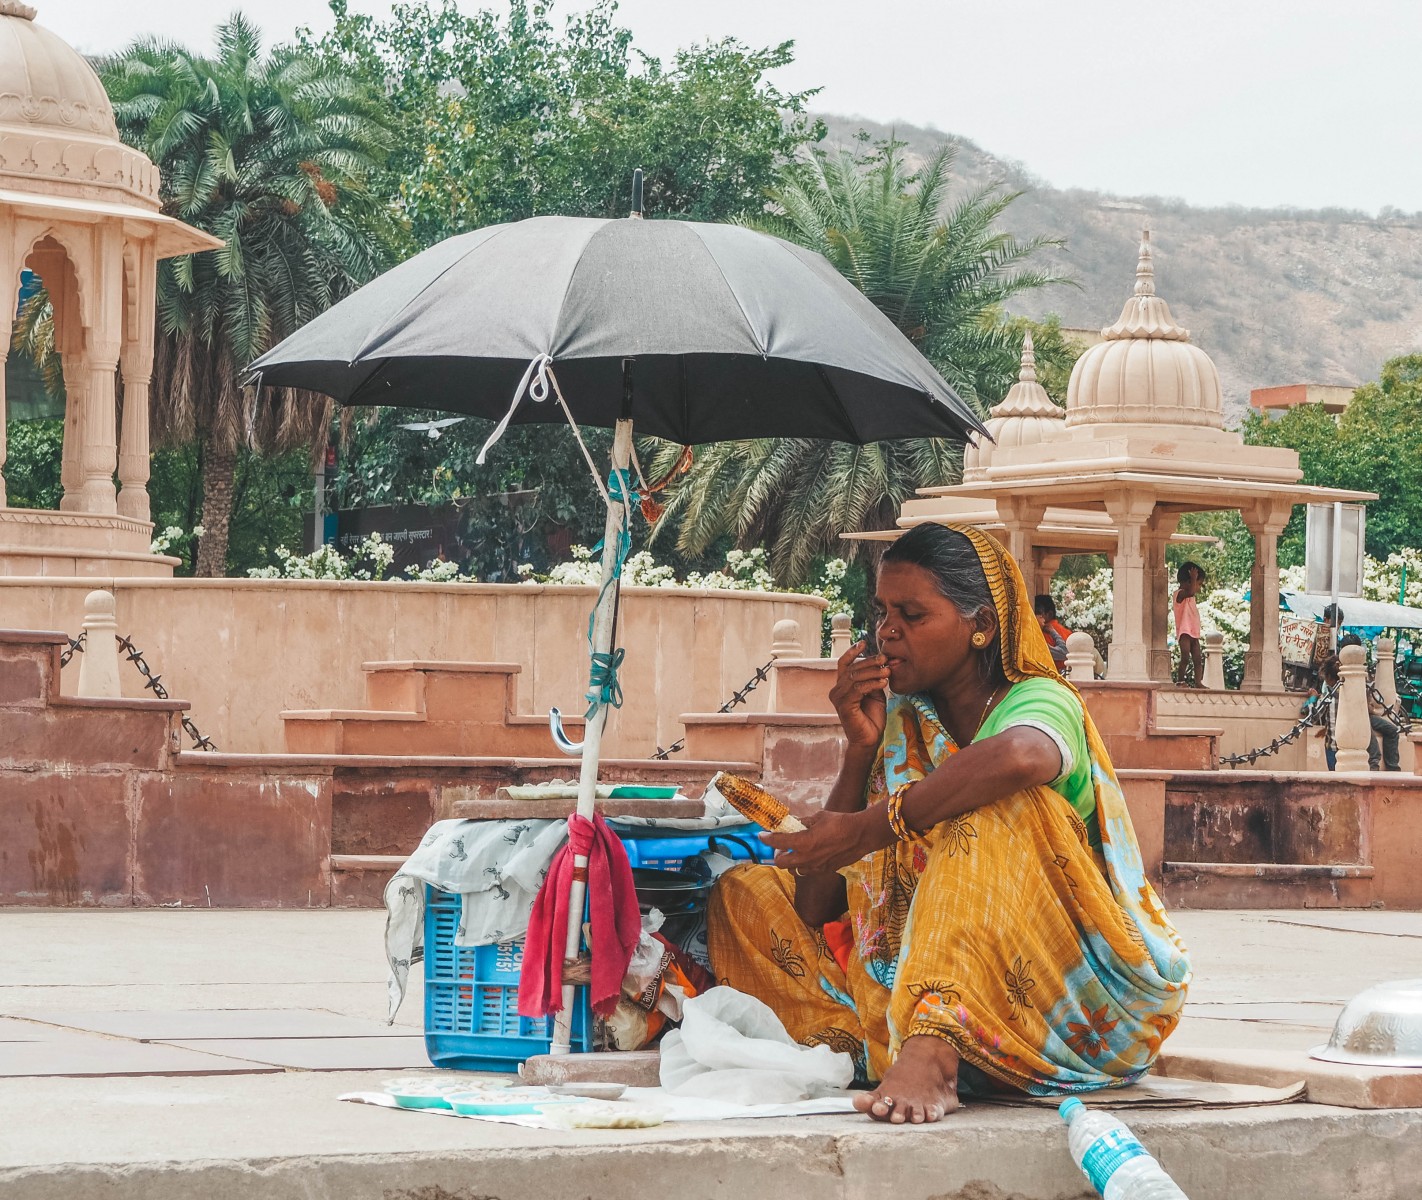 Indian lady selling corns in Jaipur